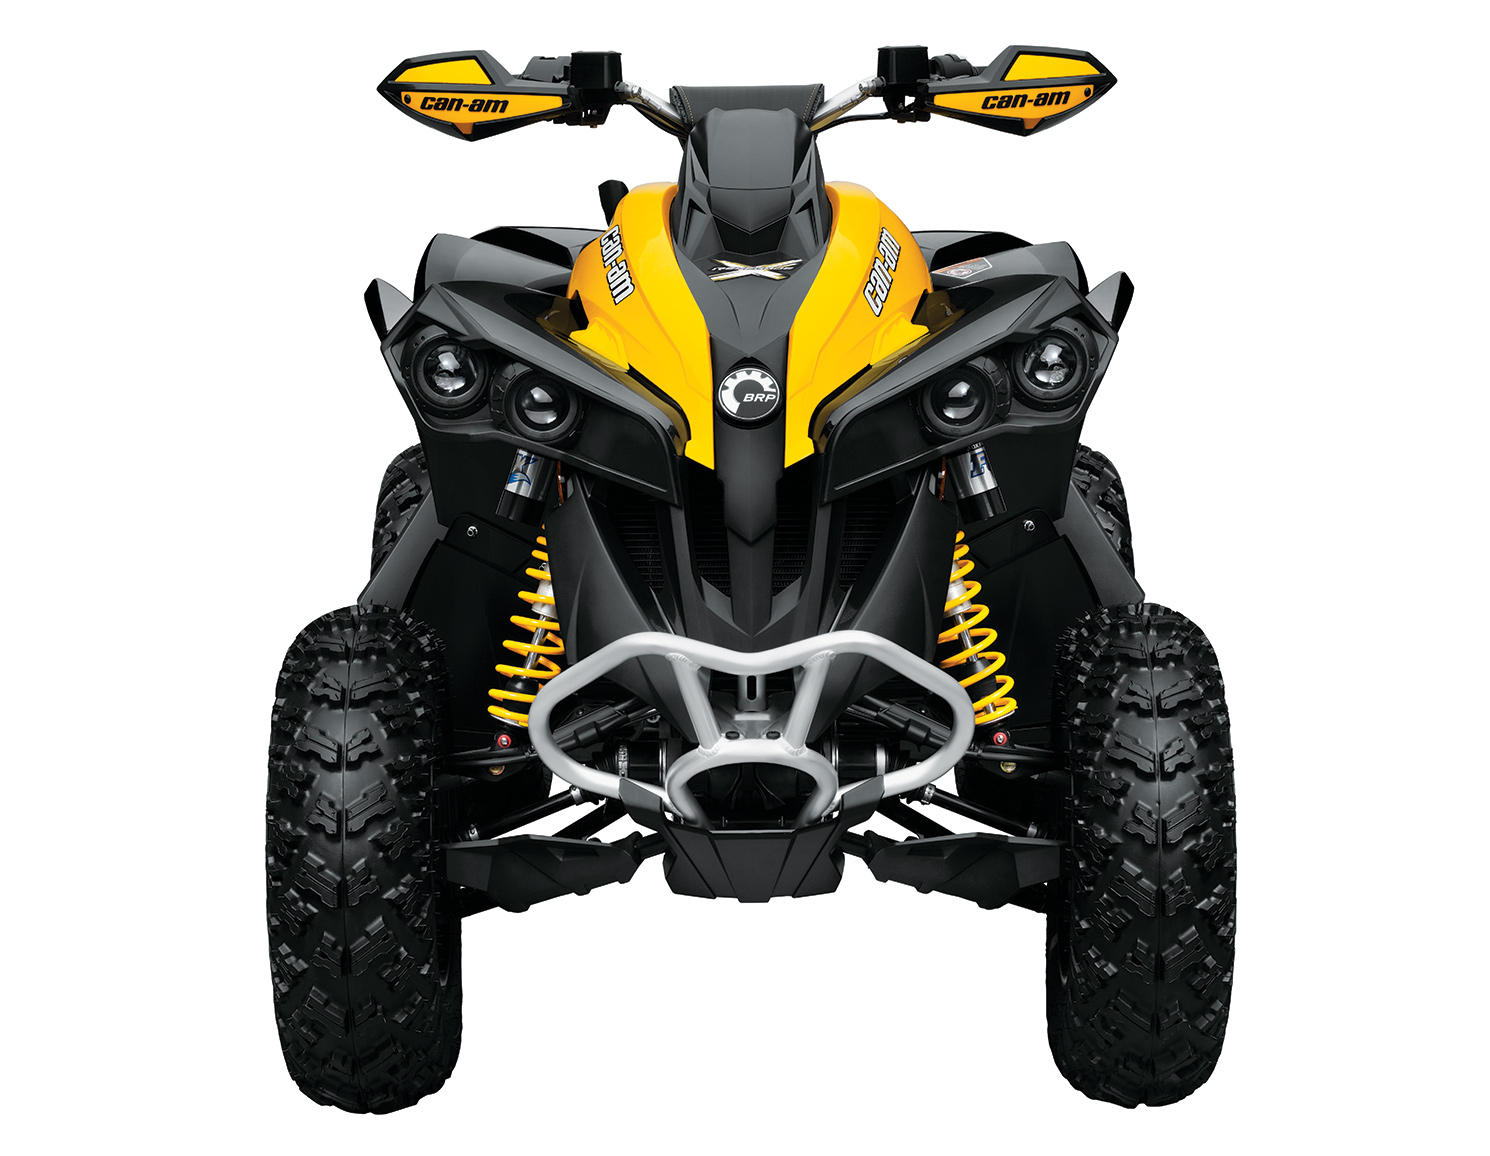  CAN-AM RENEGADE 1000 XXC v 2014  3 